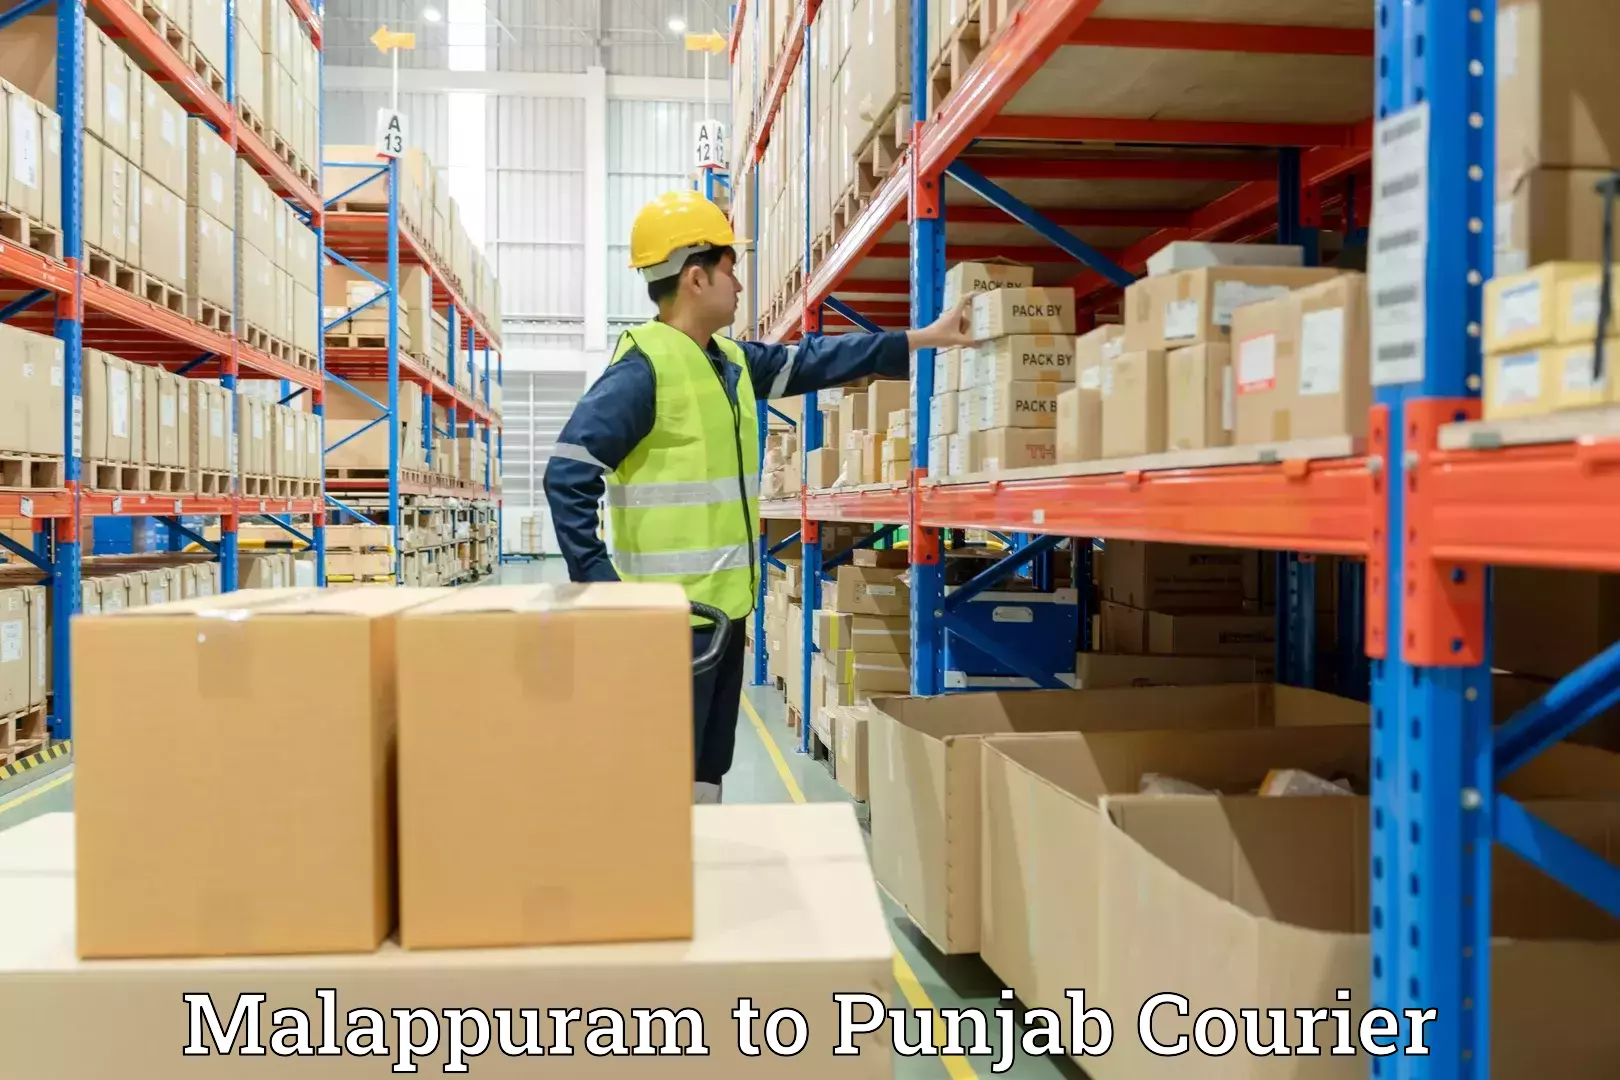 Home moving specialists Malappuram to Punjab